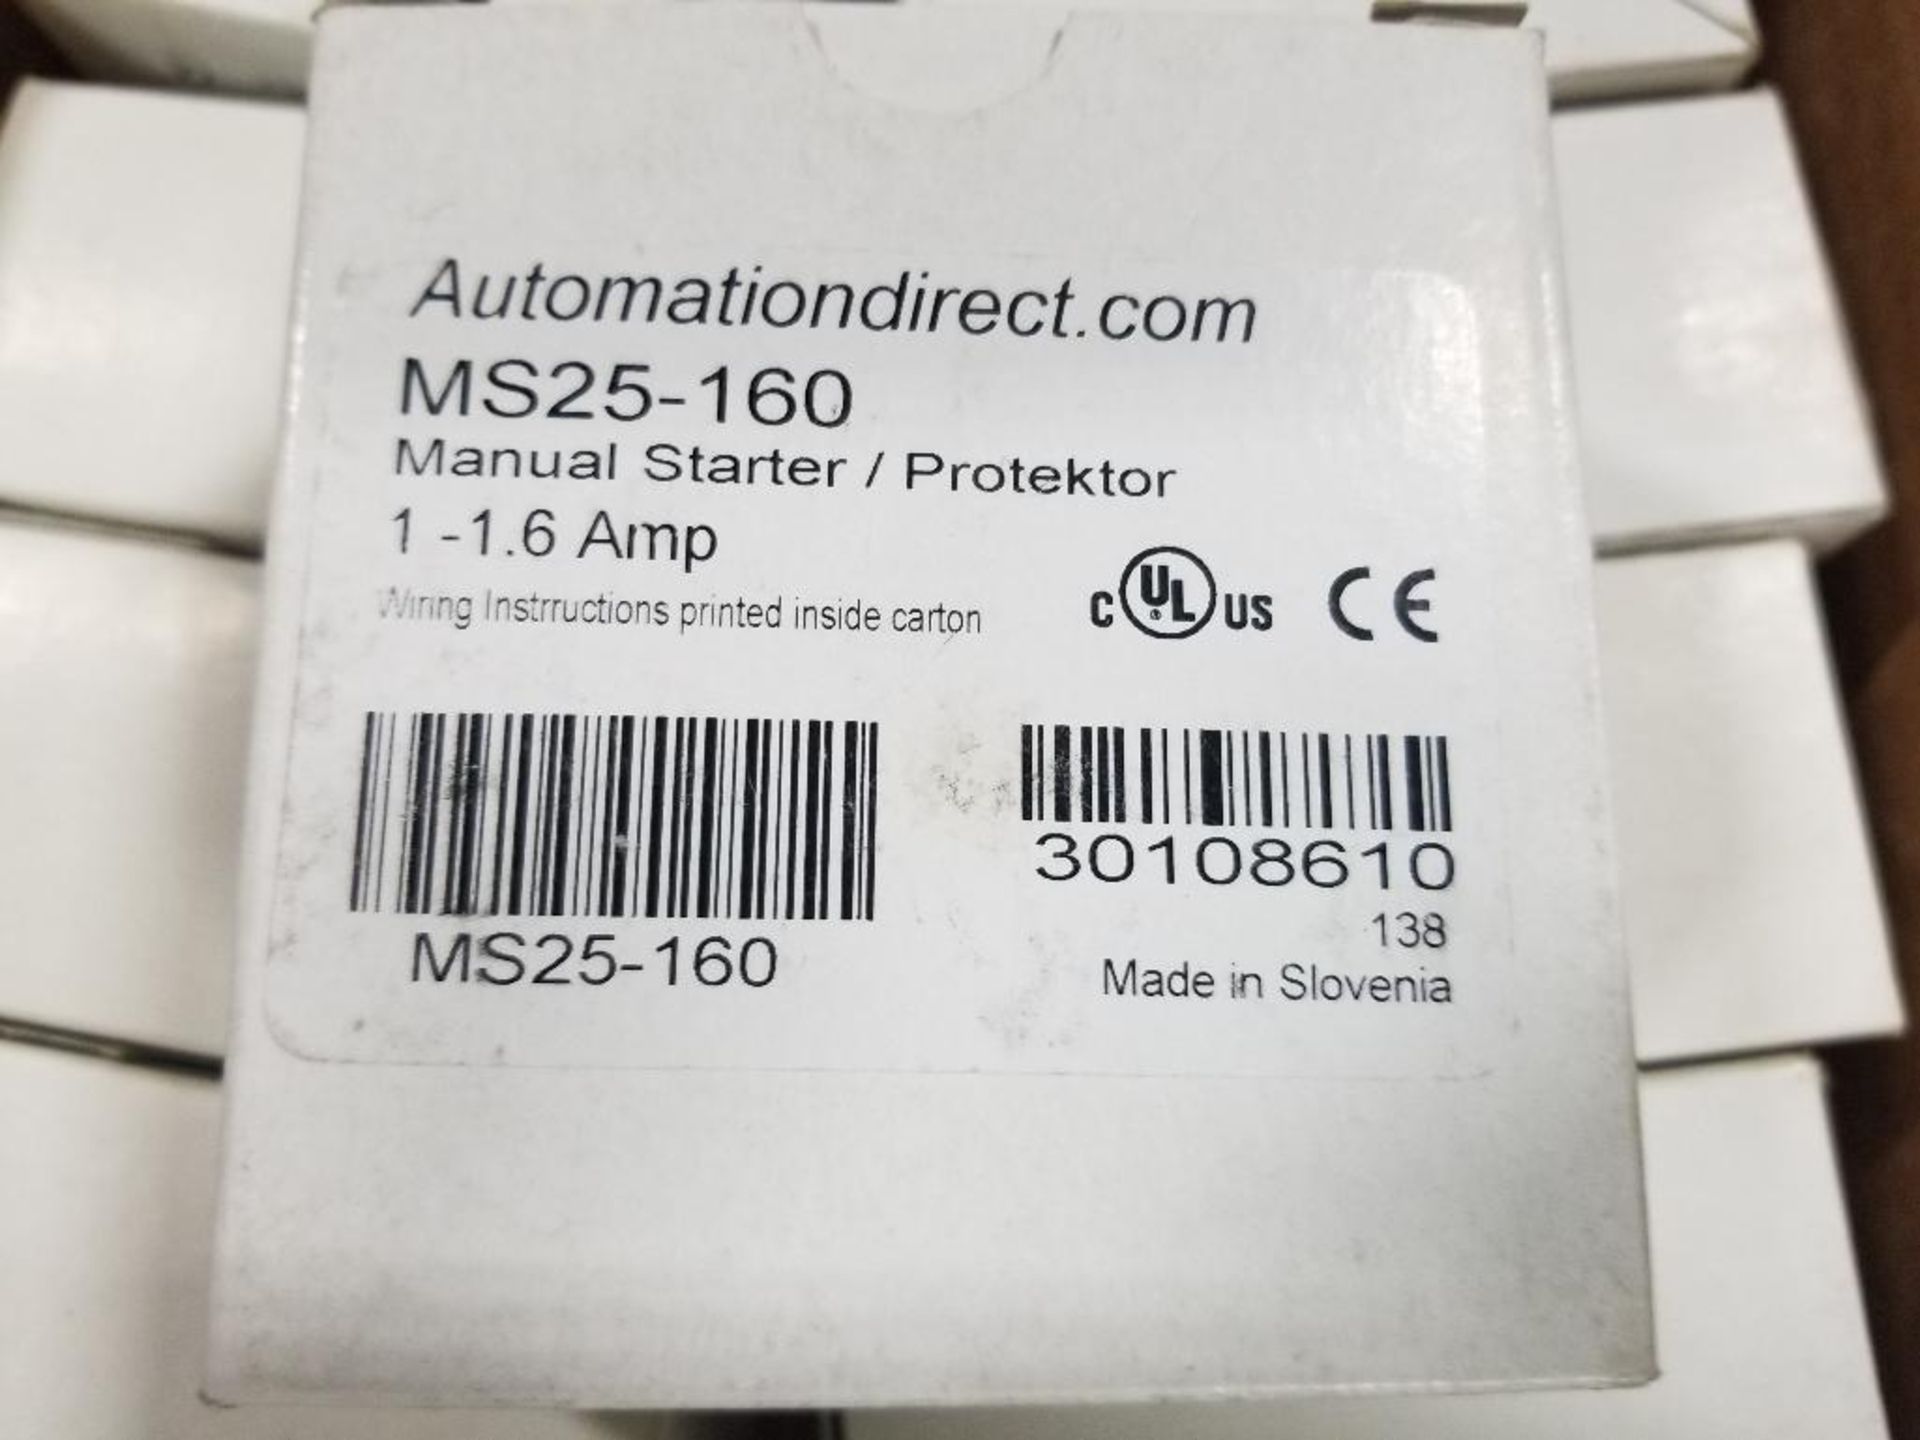 Qty 10 - Automation Direct manual starter. Model MS25-160. New in box. - Image 2 of 2